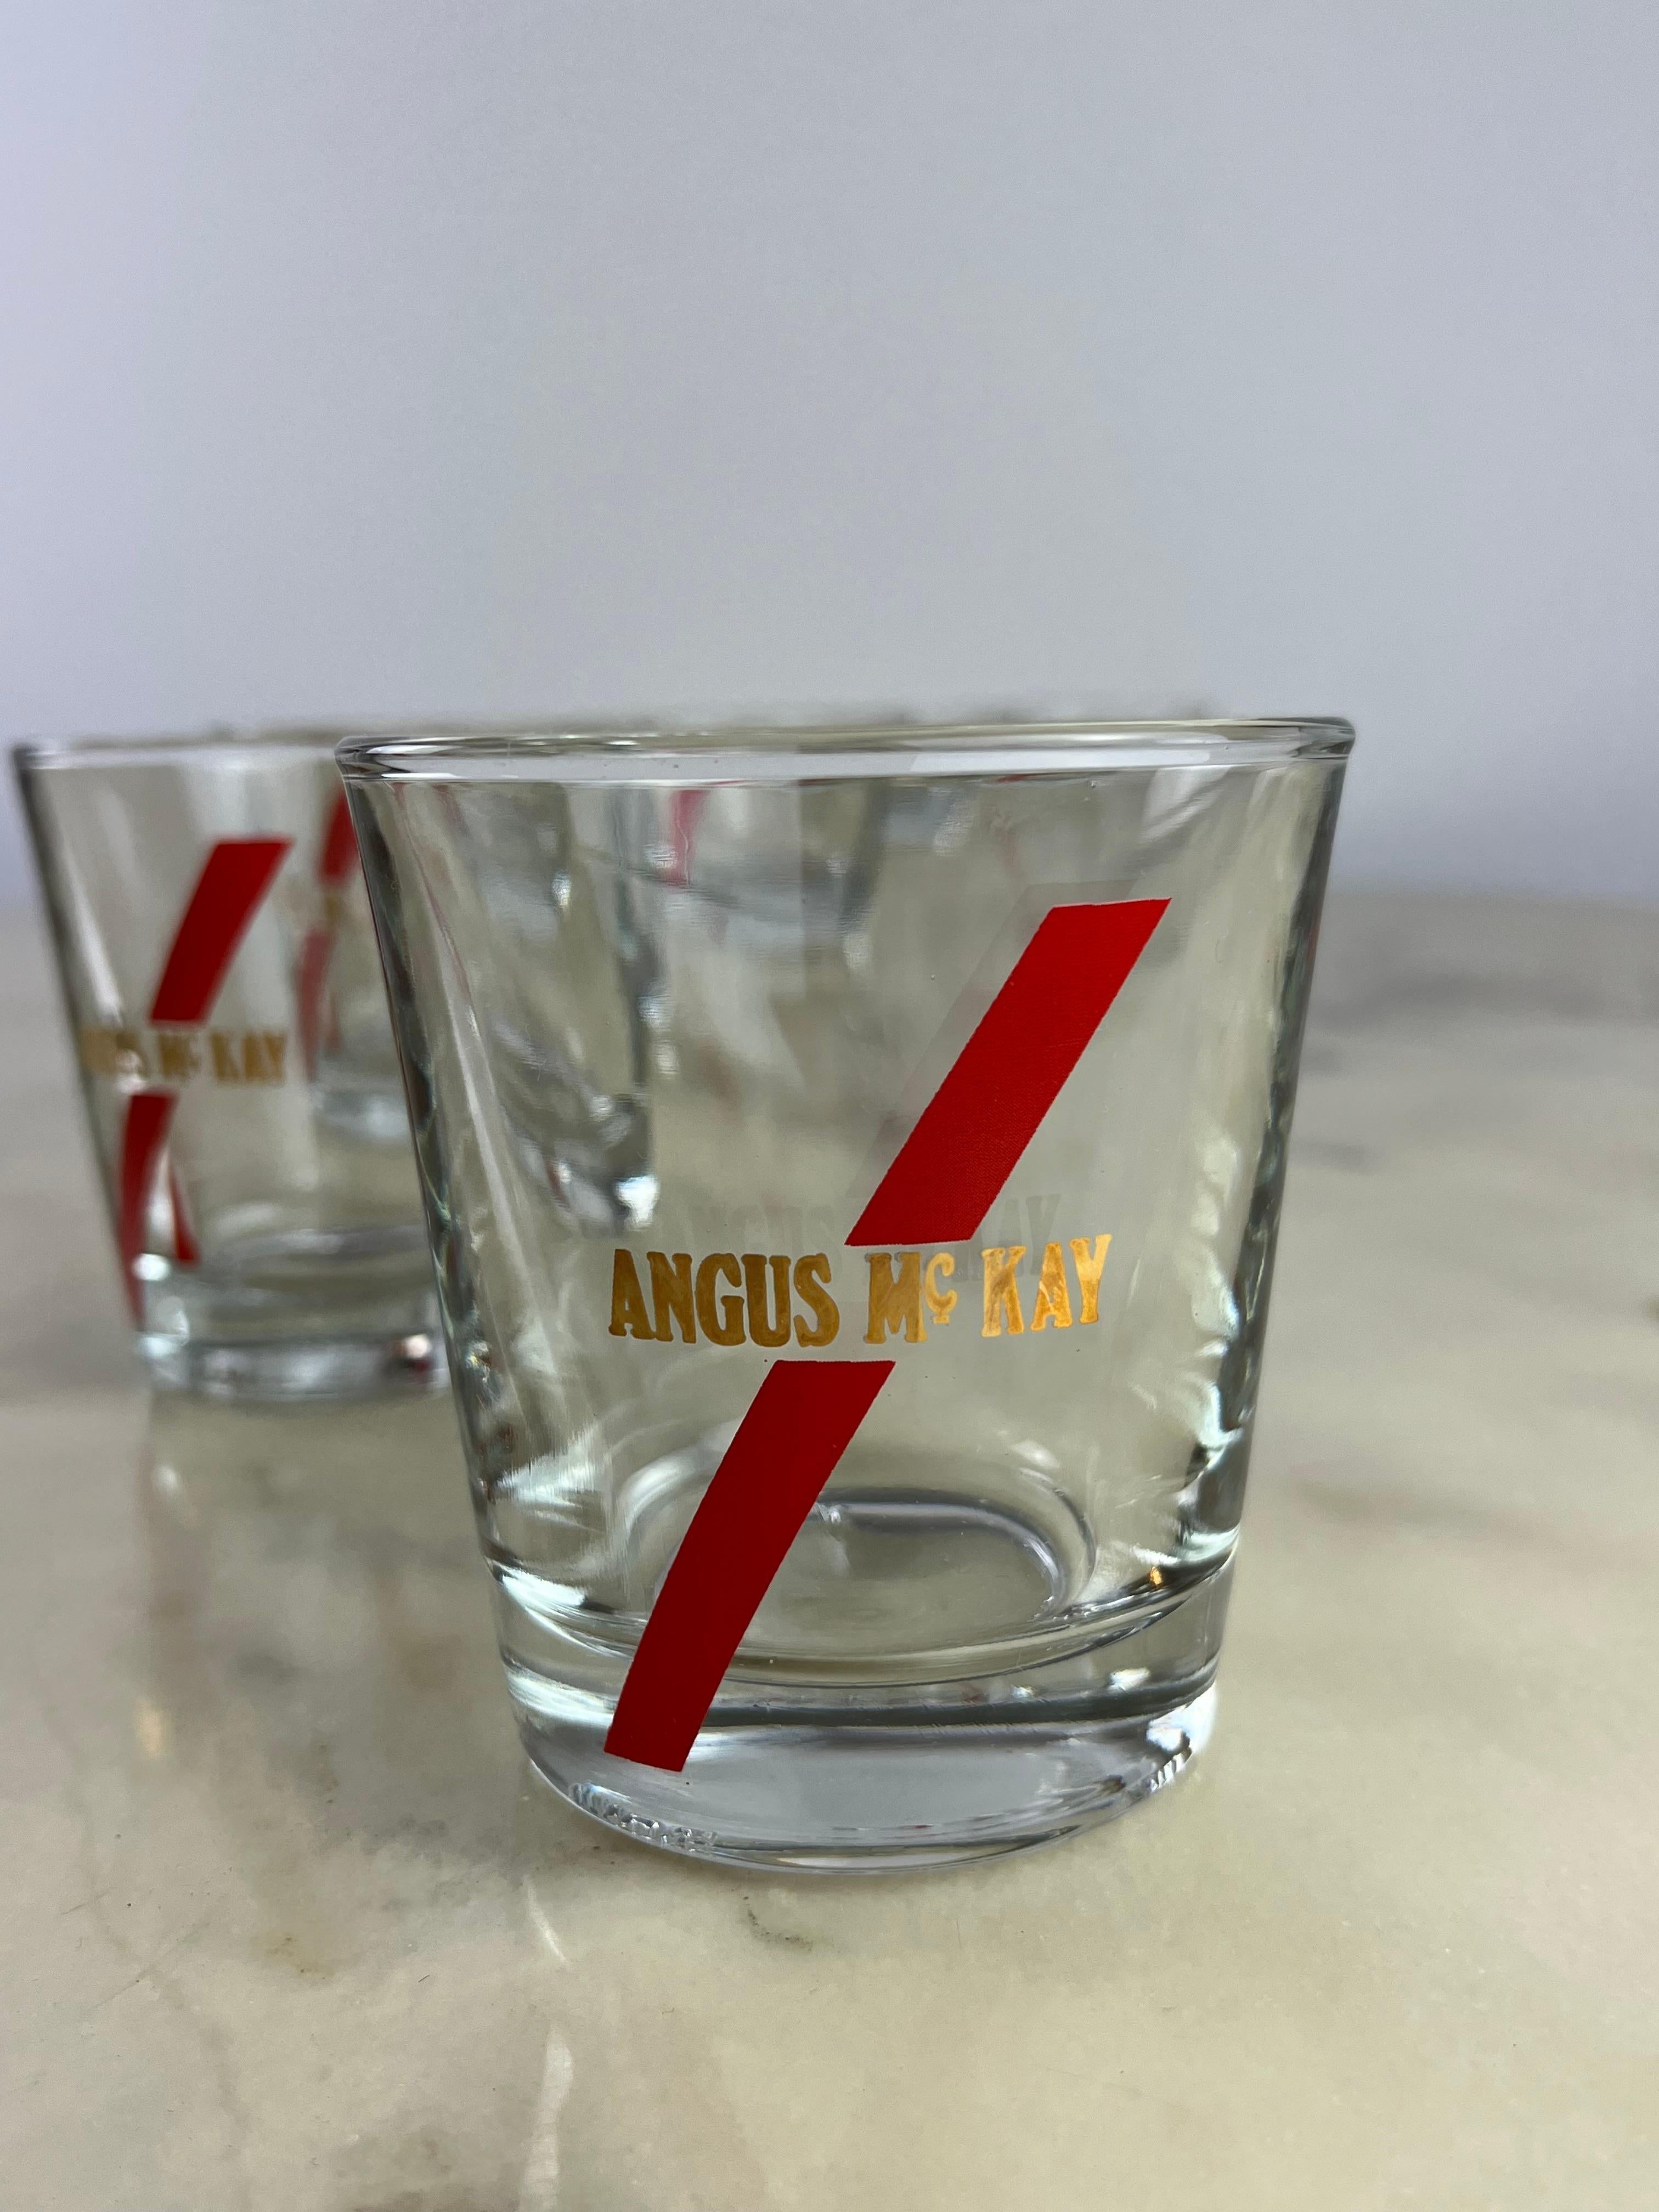 Six vintage whiskey glasses, boxed, never used, Augus Mc Kay, 1970.